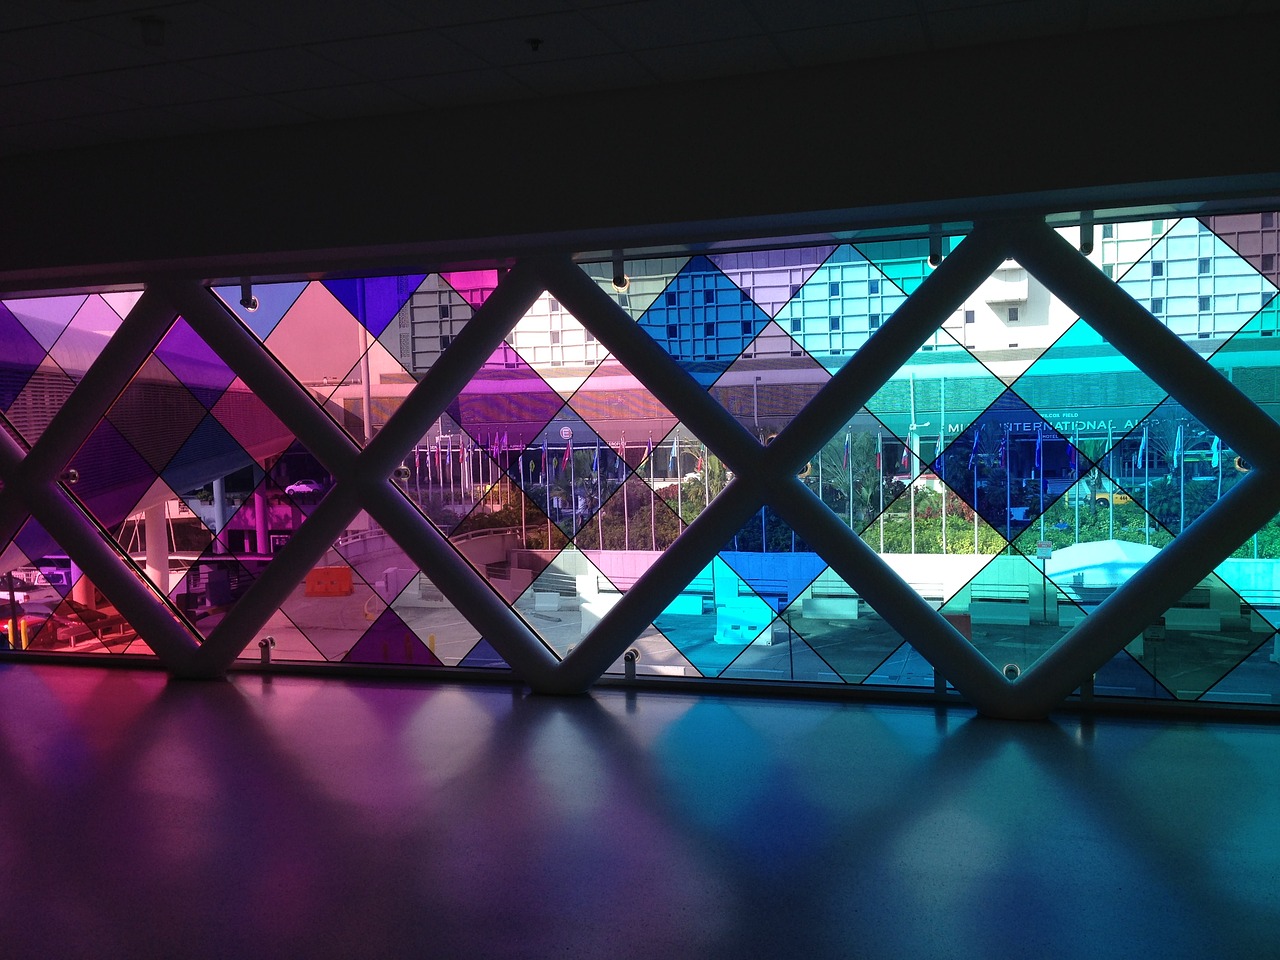 Photo of the stained glass at the Miami International Airport